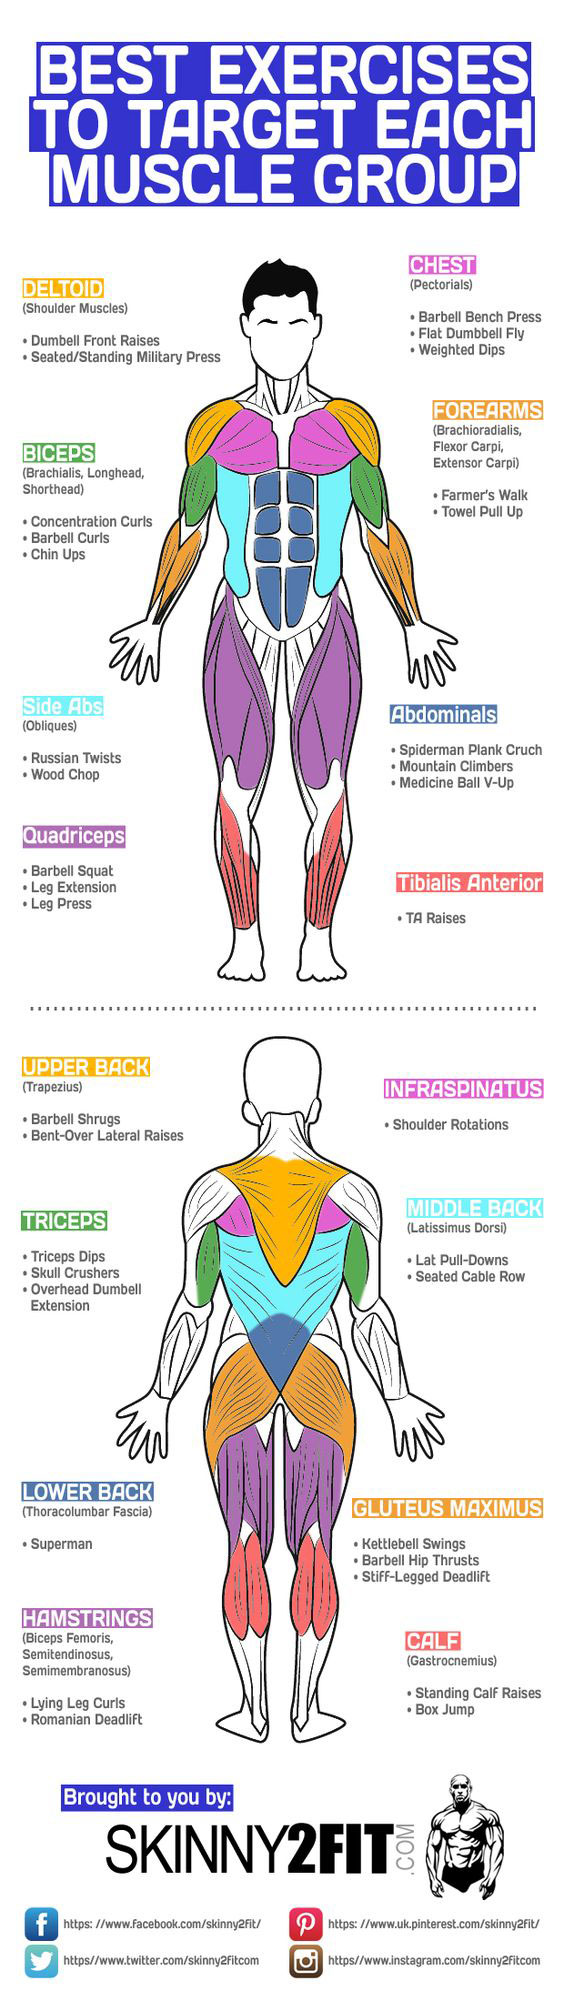 Best Exercises To Target Each Muscle Group Infographic Best